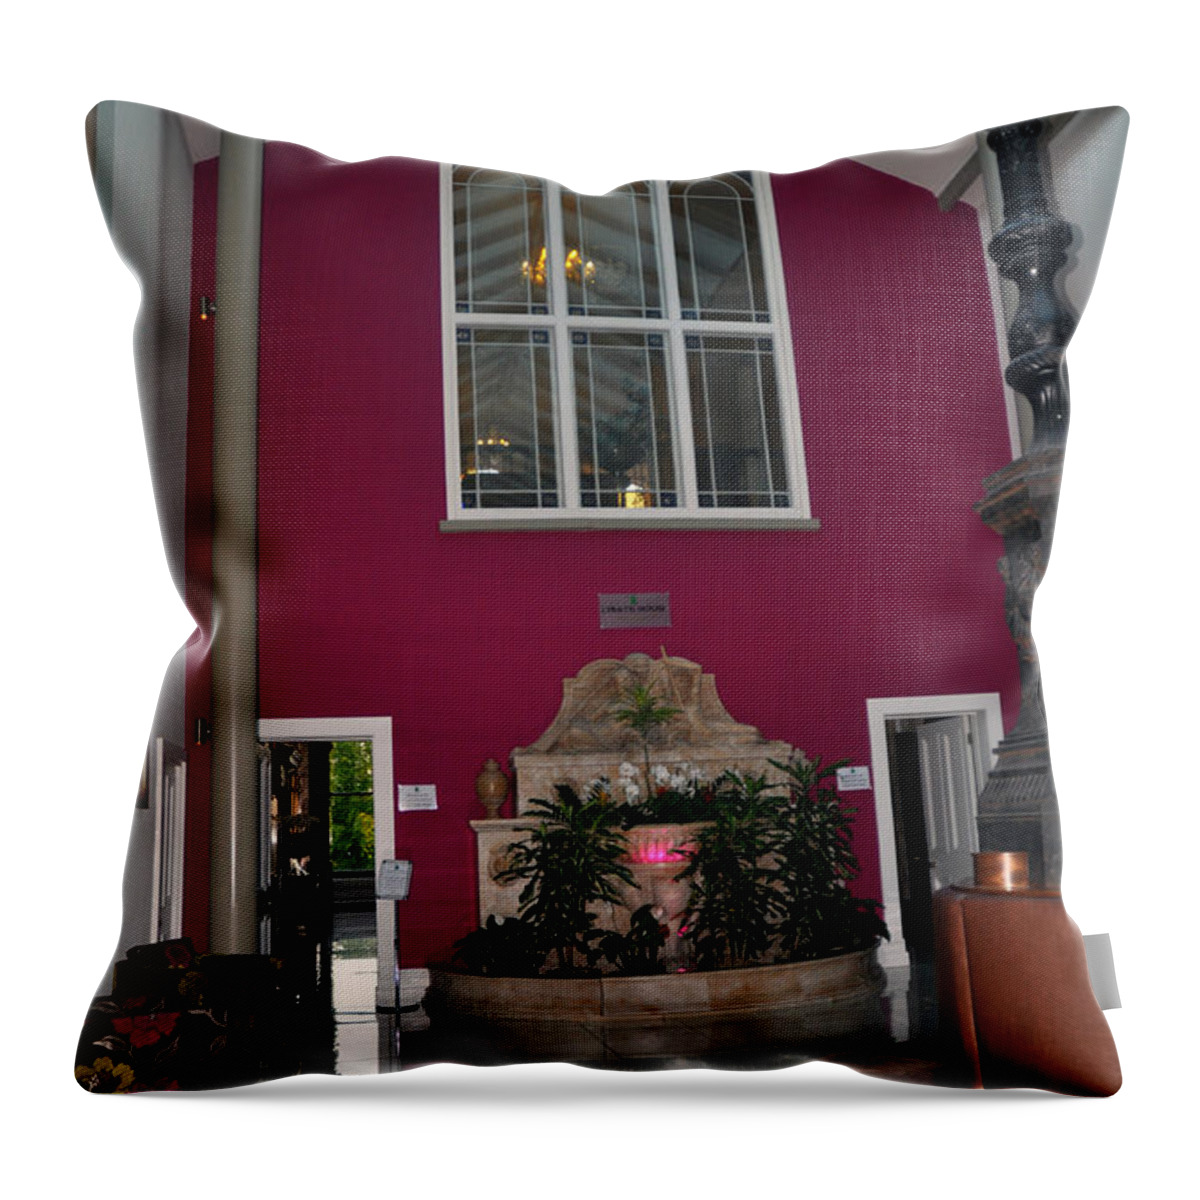 Lyrath Estate Throw Pillow featuring the photograph Inside entry Lyrath Estate Hotel by Cindy Murphy - NightVisions 